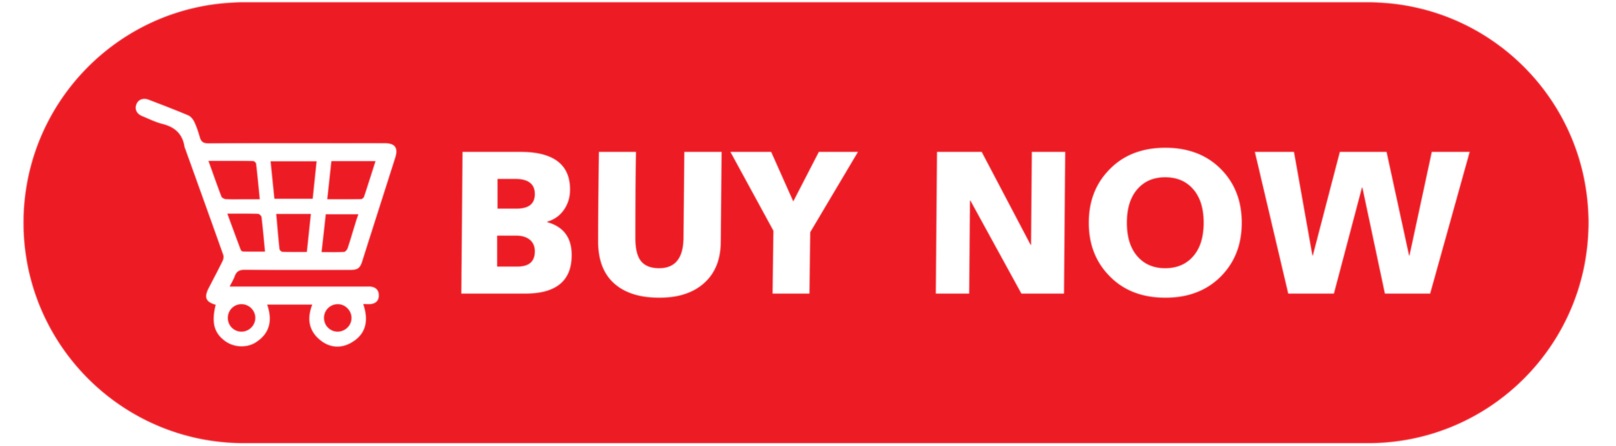 buy now button